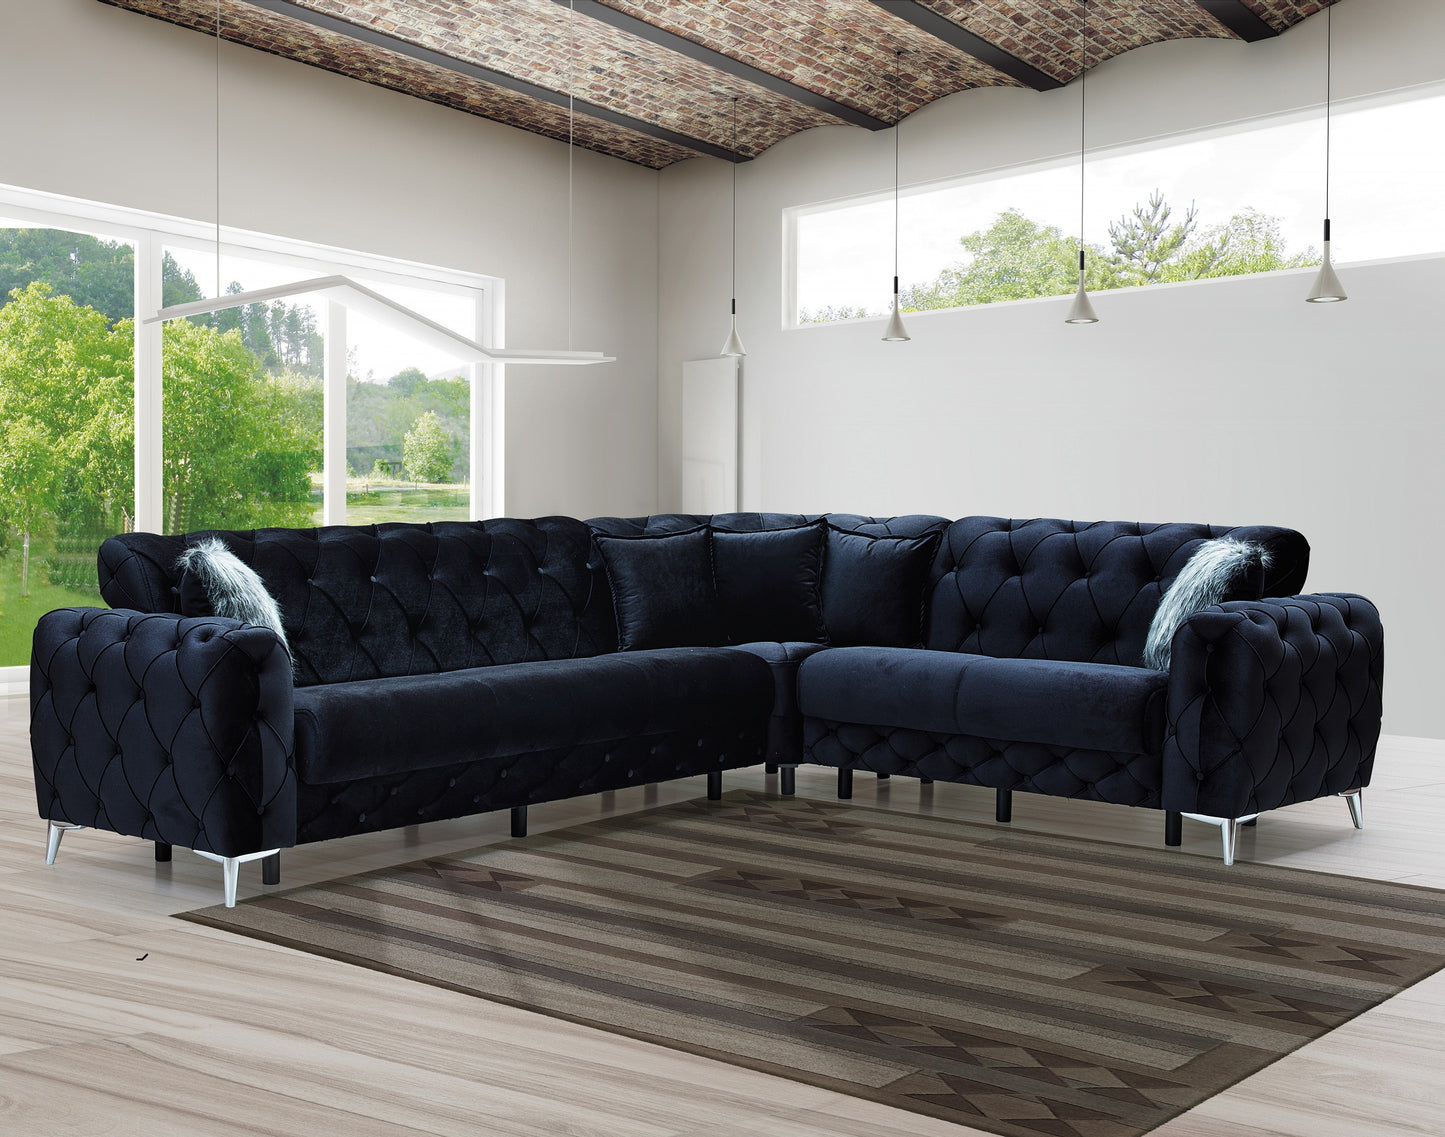 S6401 Ace Sectional (Black)